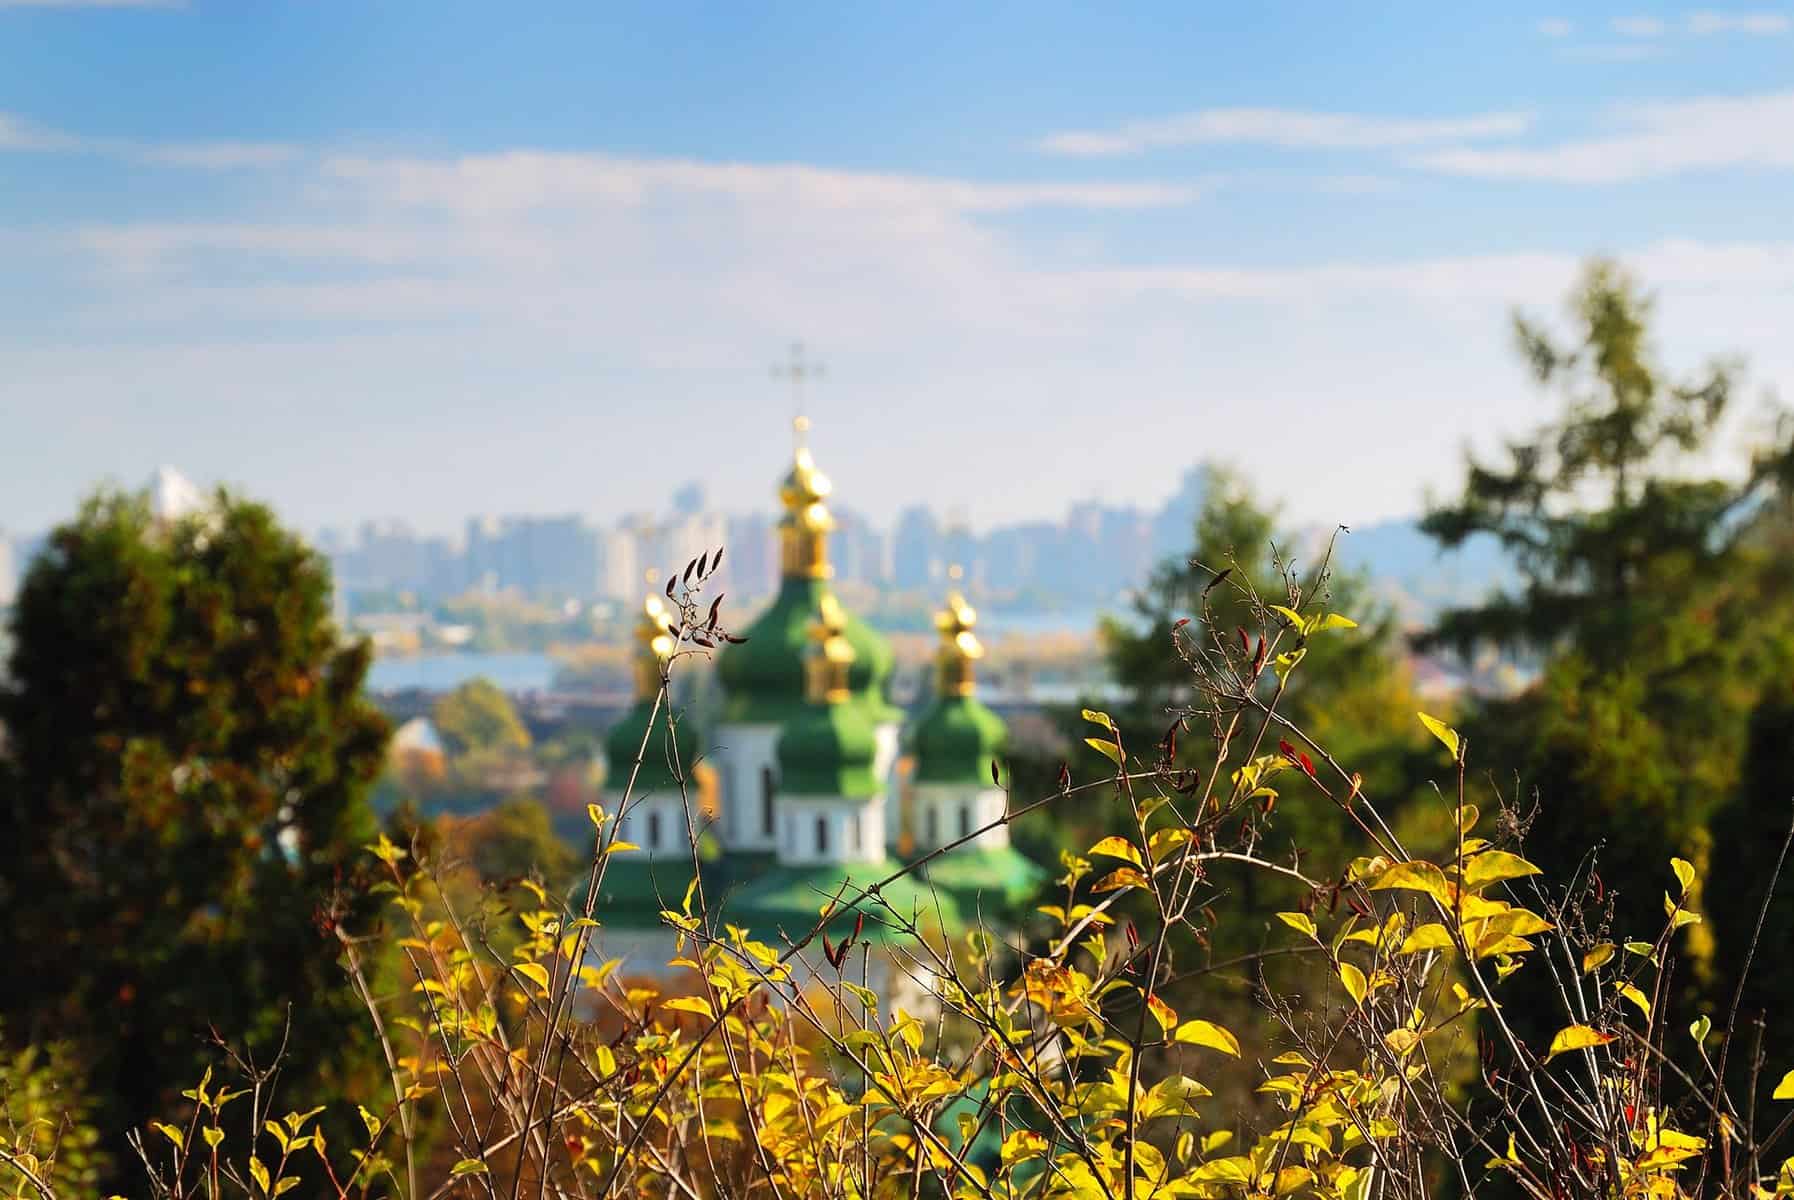 A blurred building in Ukraine is shown with its green domes topped with gold.